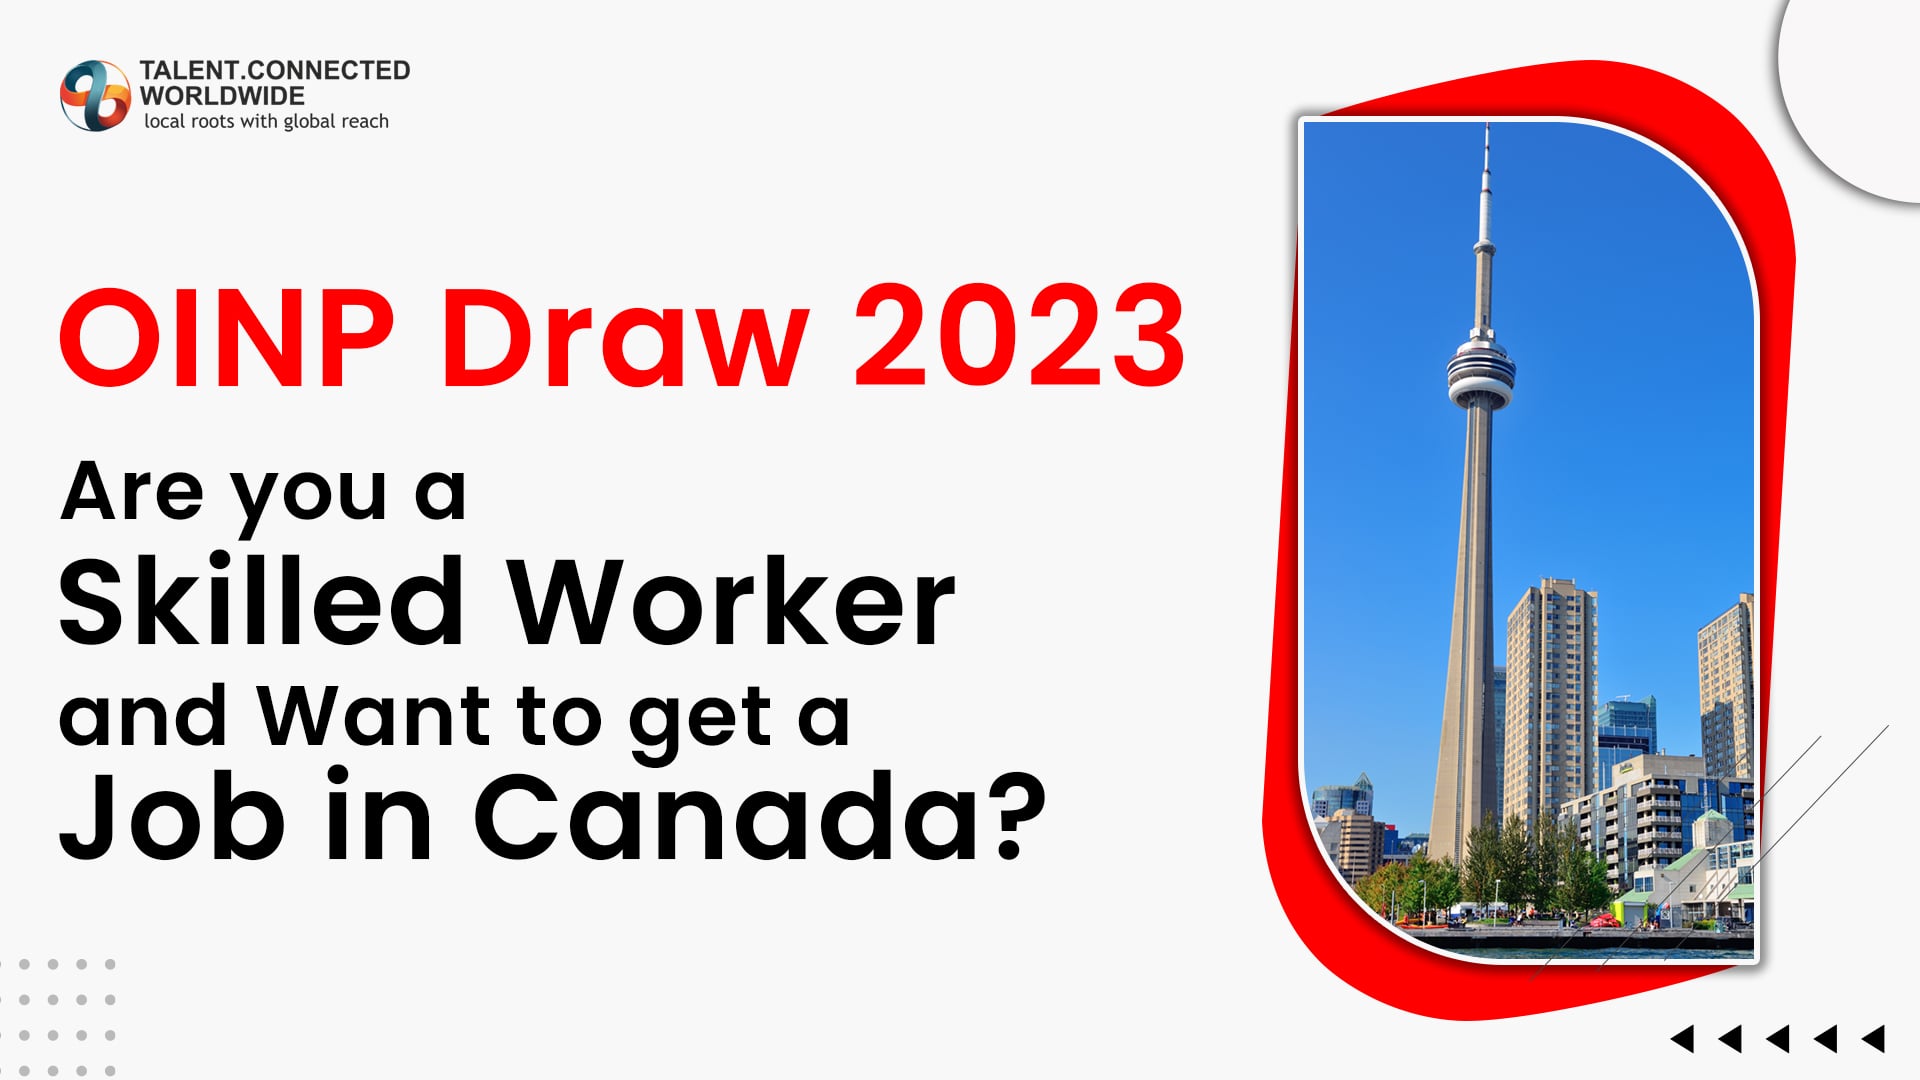 OINP Draw 2023 Want to get a “Job in Canada?”